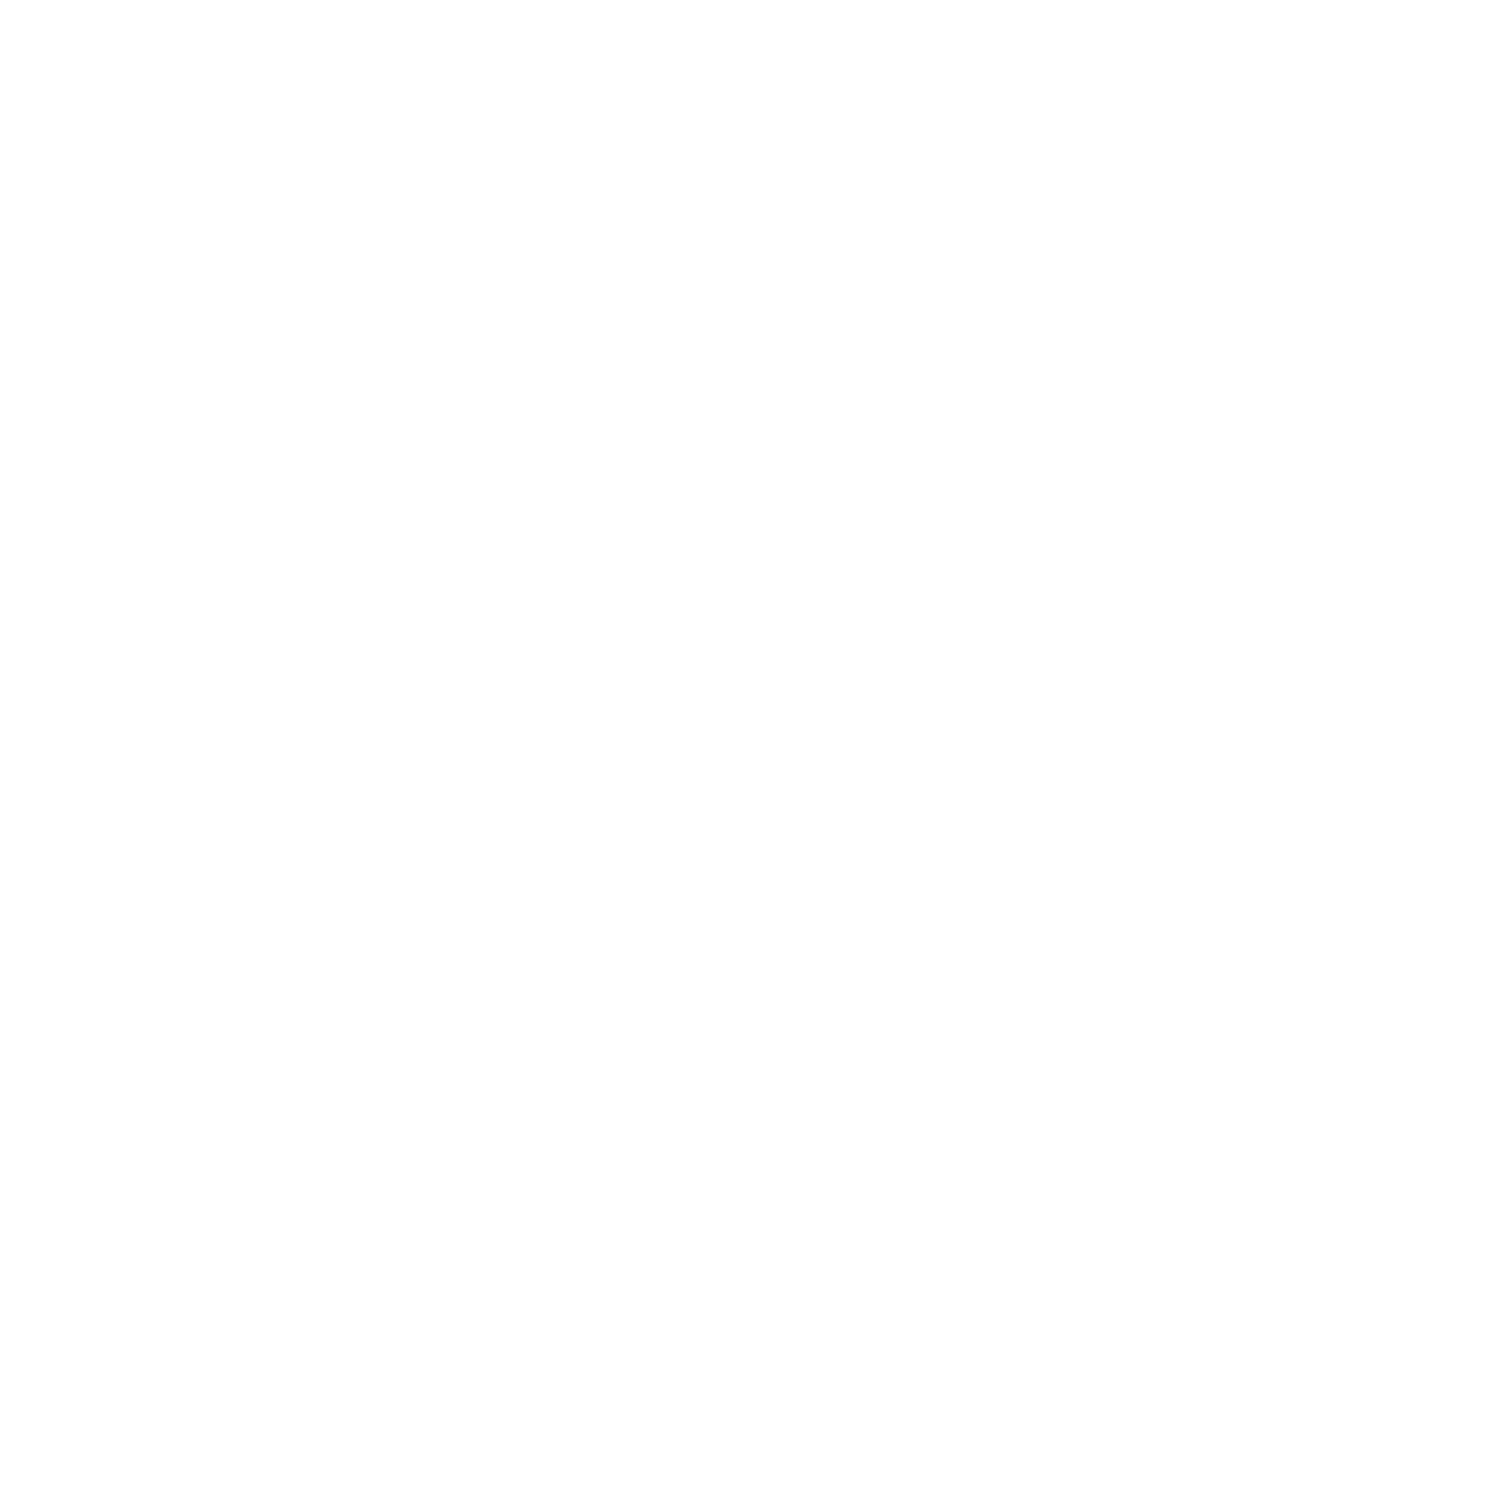 Caan Rose Estates Ltd - Slough : Letting agents in Hounslow Greater London Hounslow